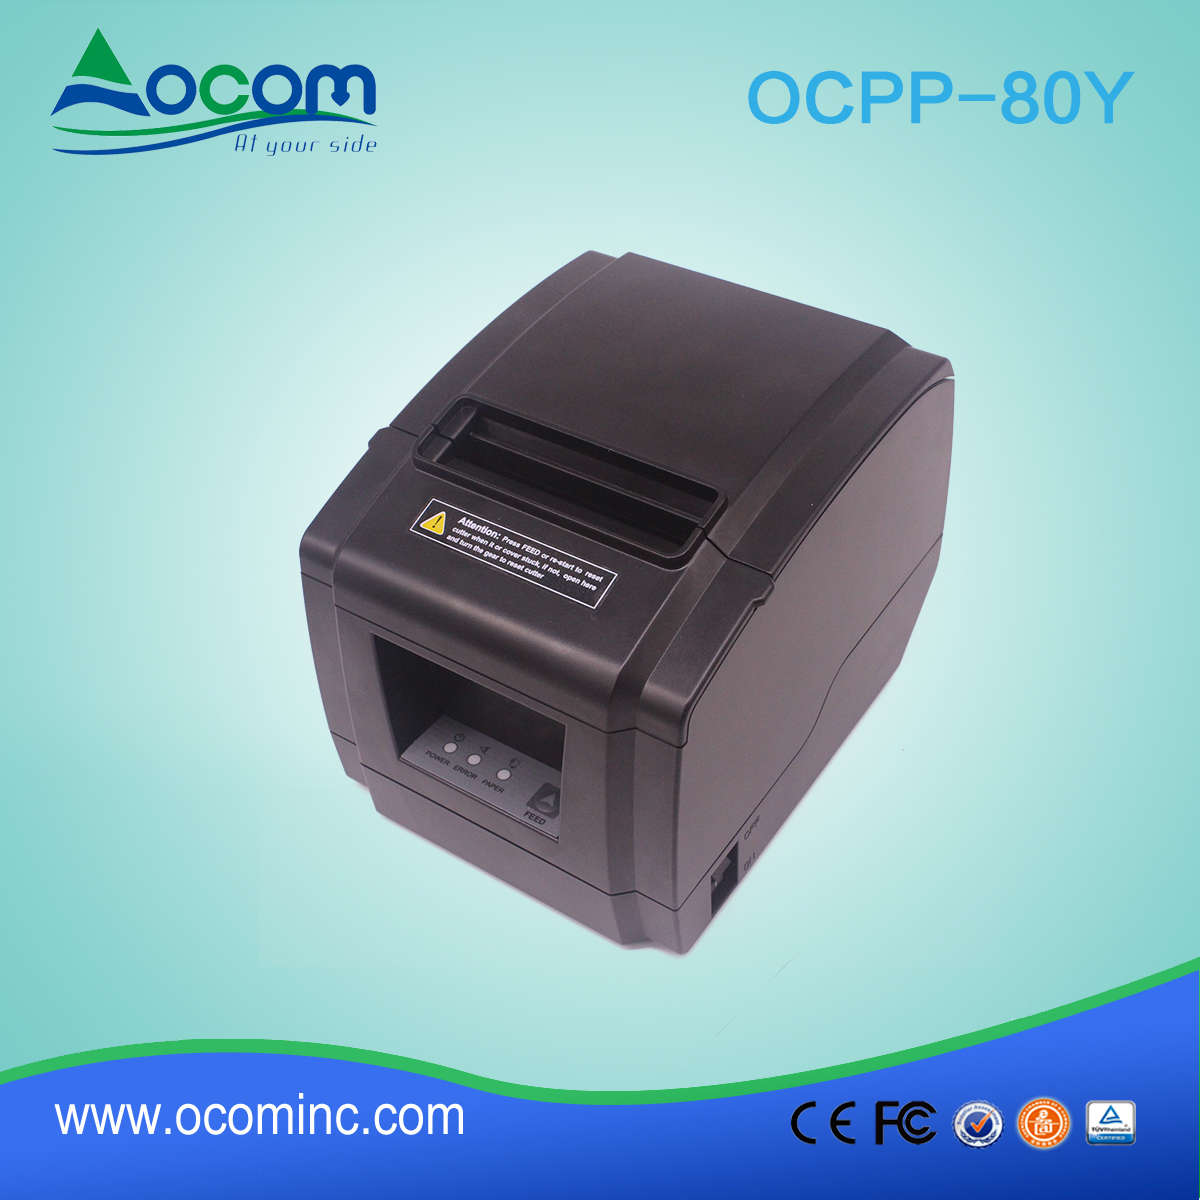 New Model OCPP-80Y 80mm Thermal Printer With usb & Auto Cutter